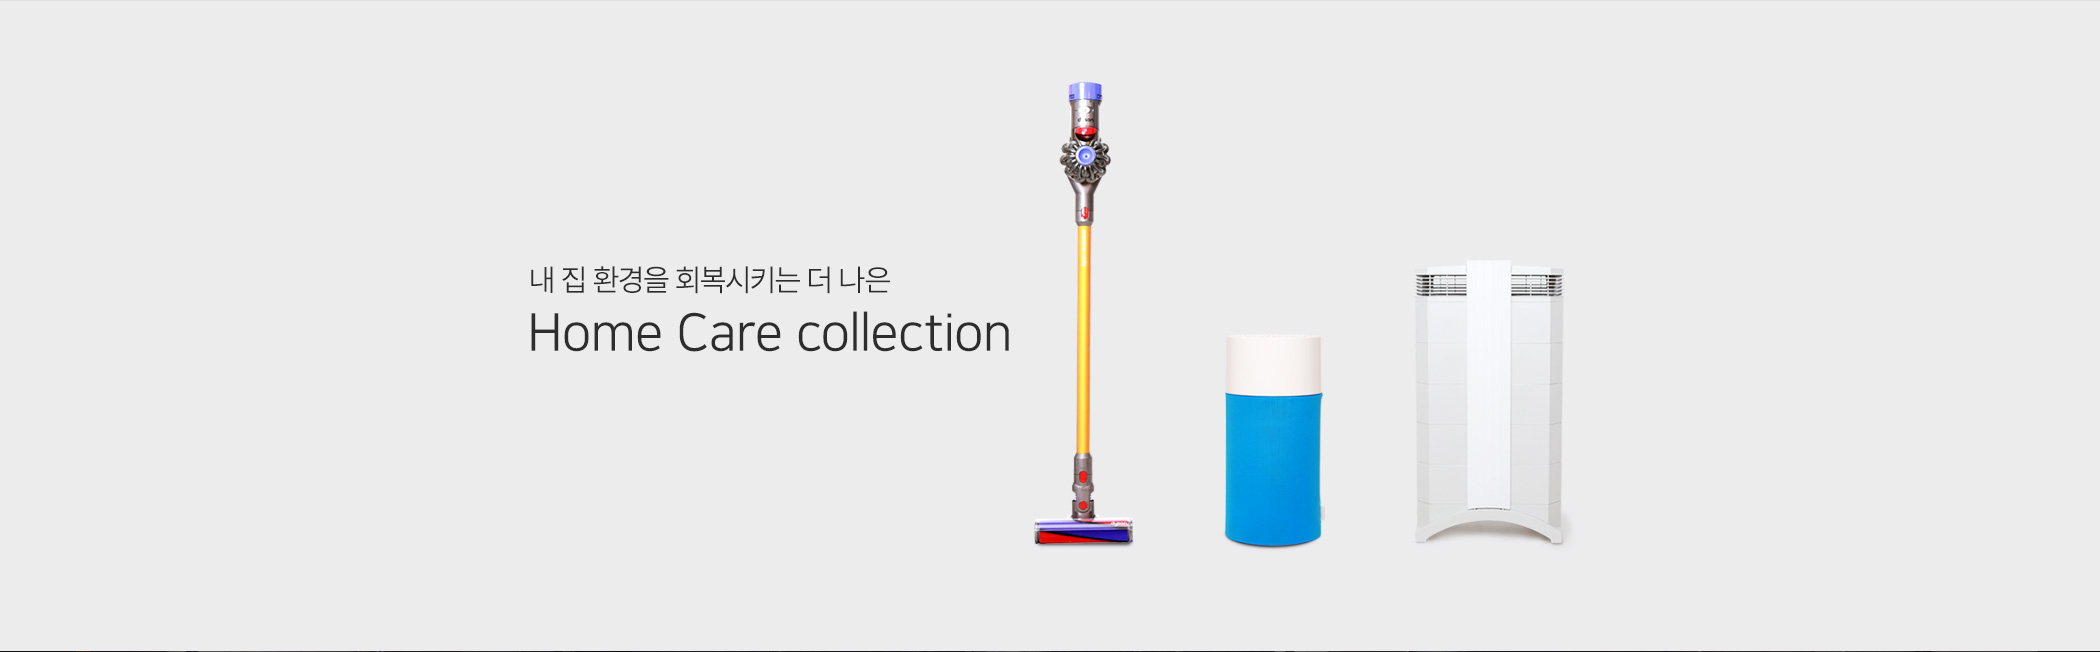 home care collection